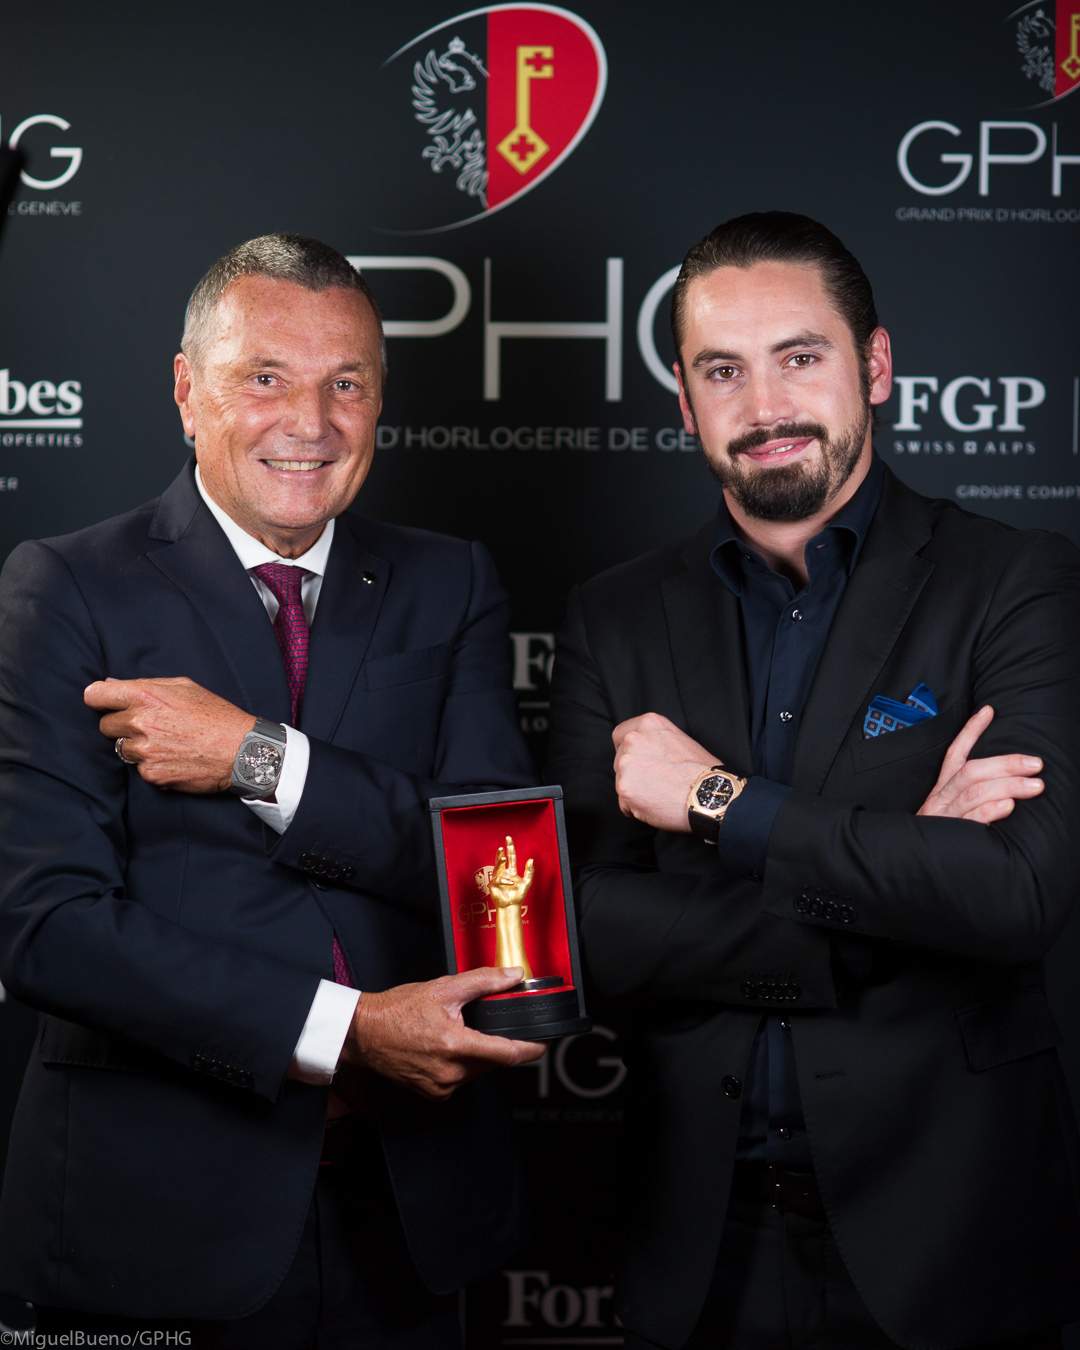 Jean-Christophe Babin, CEO of Bulgari Group, winner of the Audacy Prize 2022 and Quentin Epiney, Founder and CEO of FGP SWISS &amp; ALPS